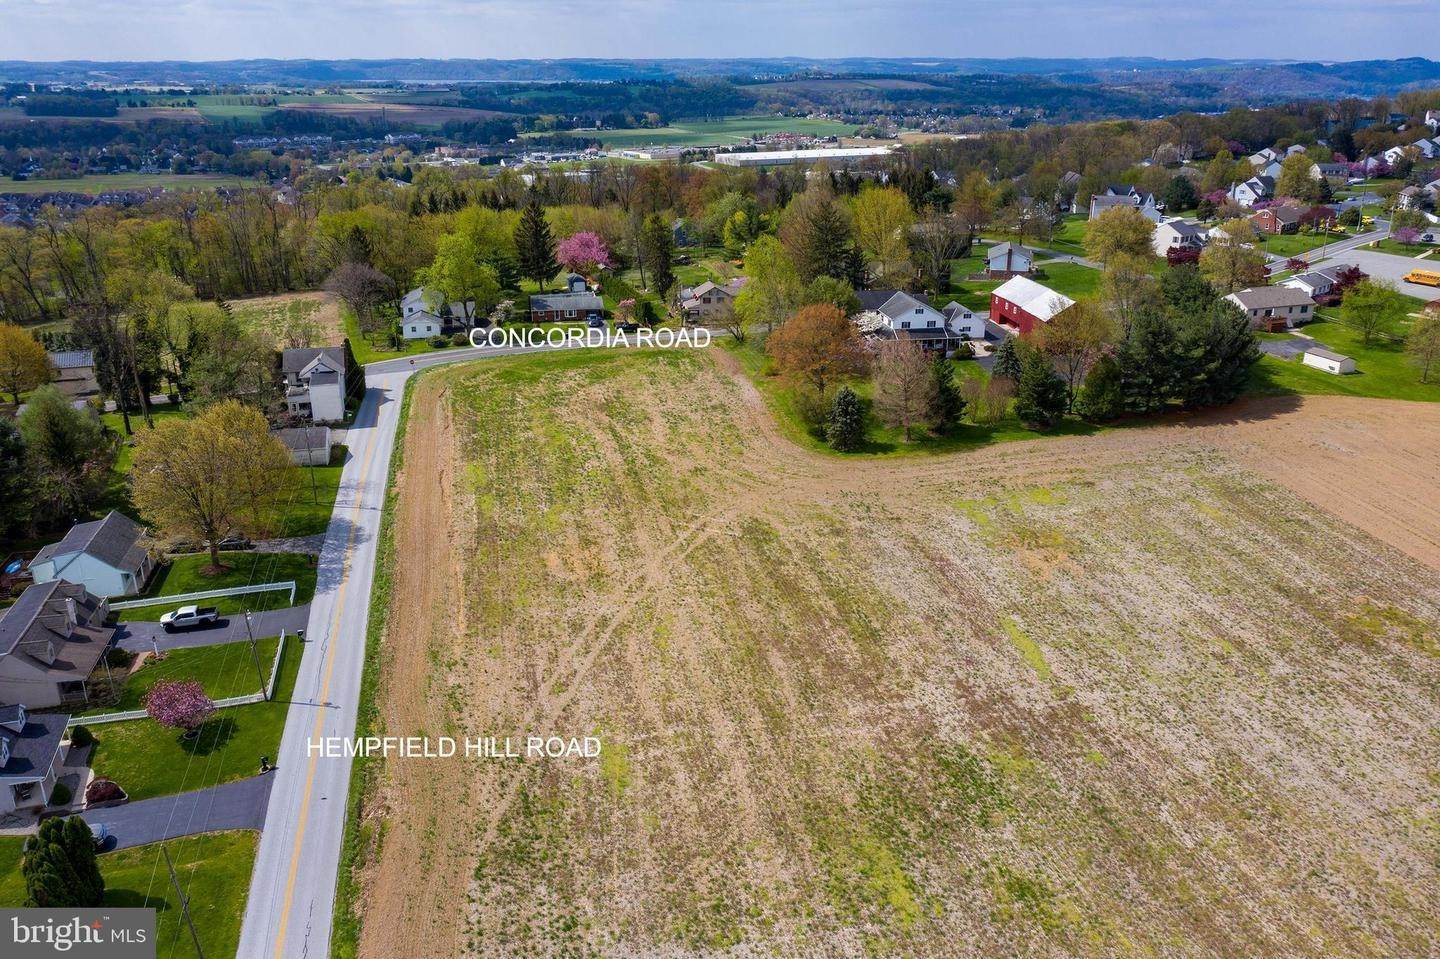 10. Land for Sale at 423-LOT # 5 HEMPFIELD HILL RD #LOT # 5 Columbia, Pennsylvania 17512 United States